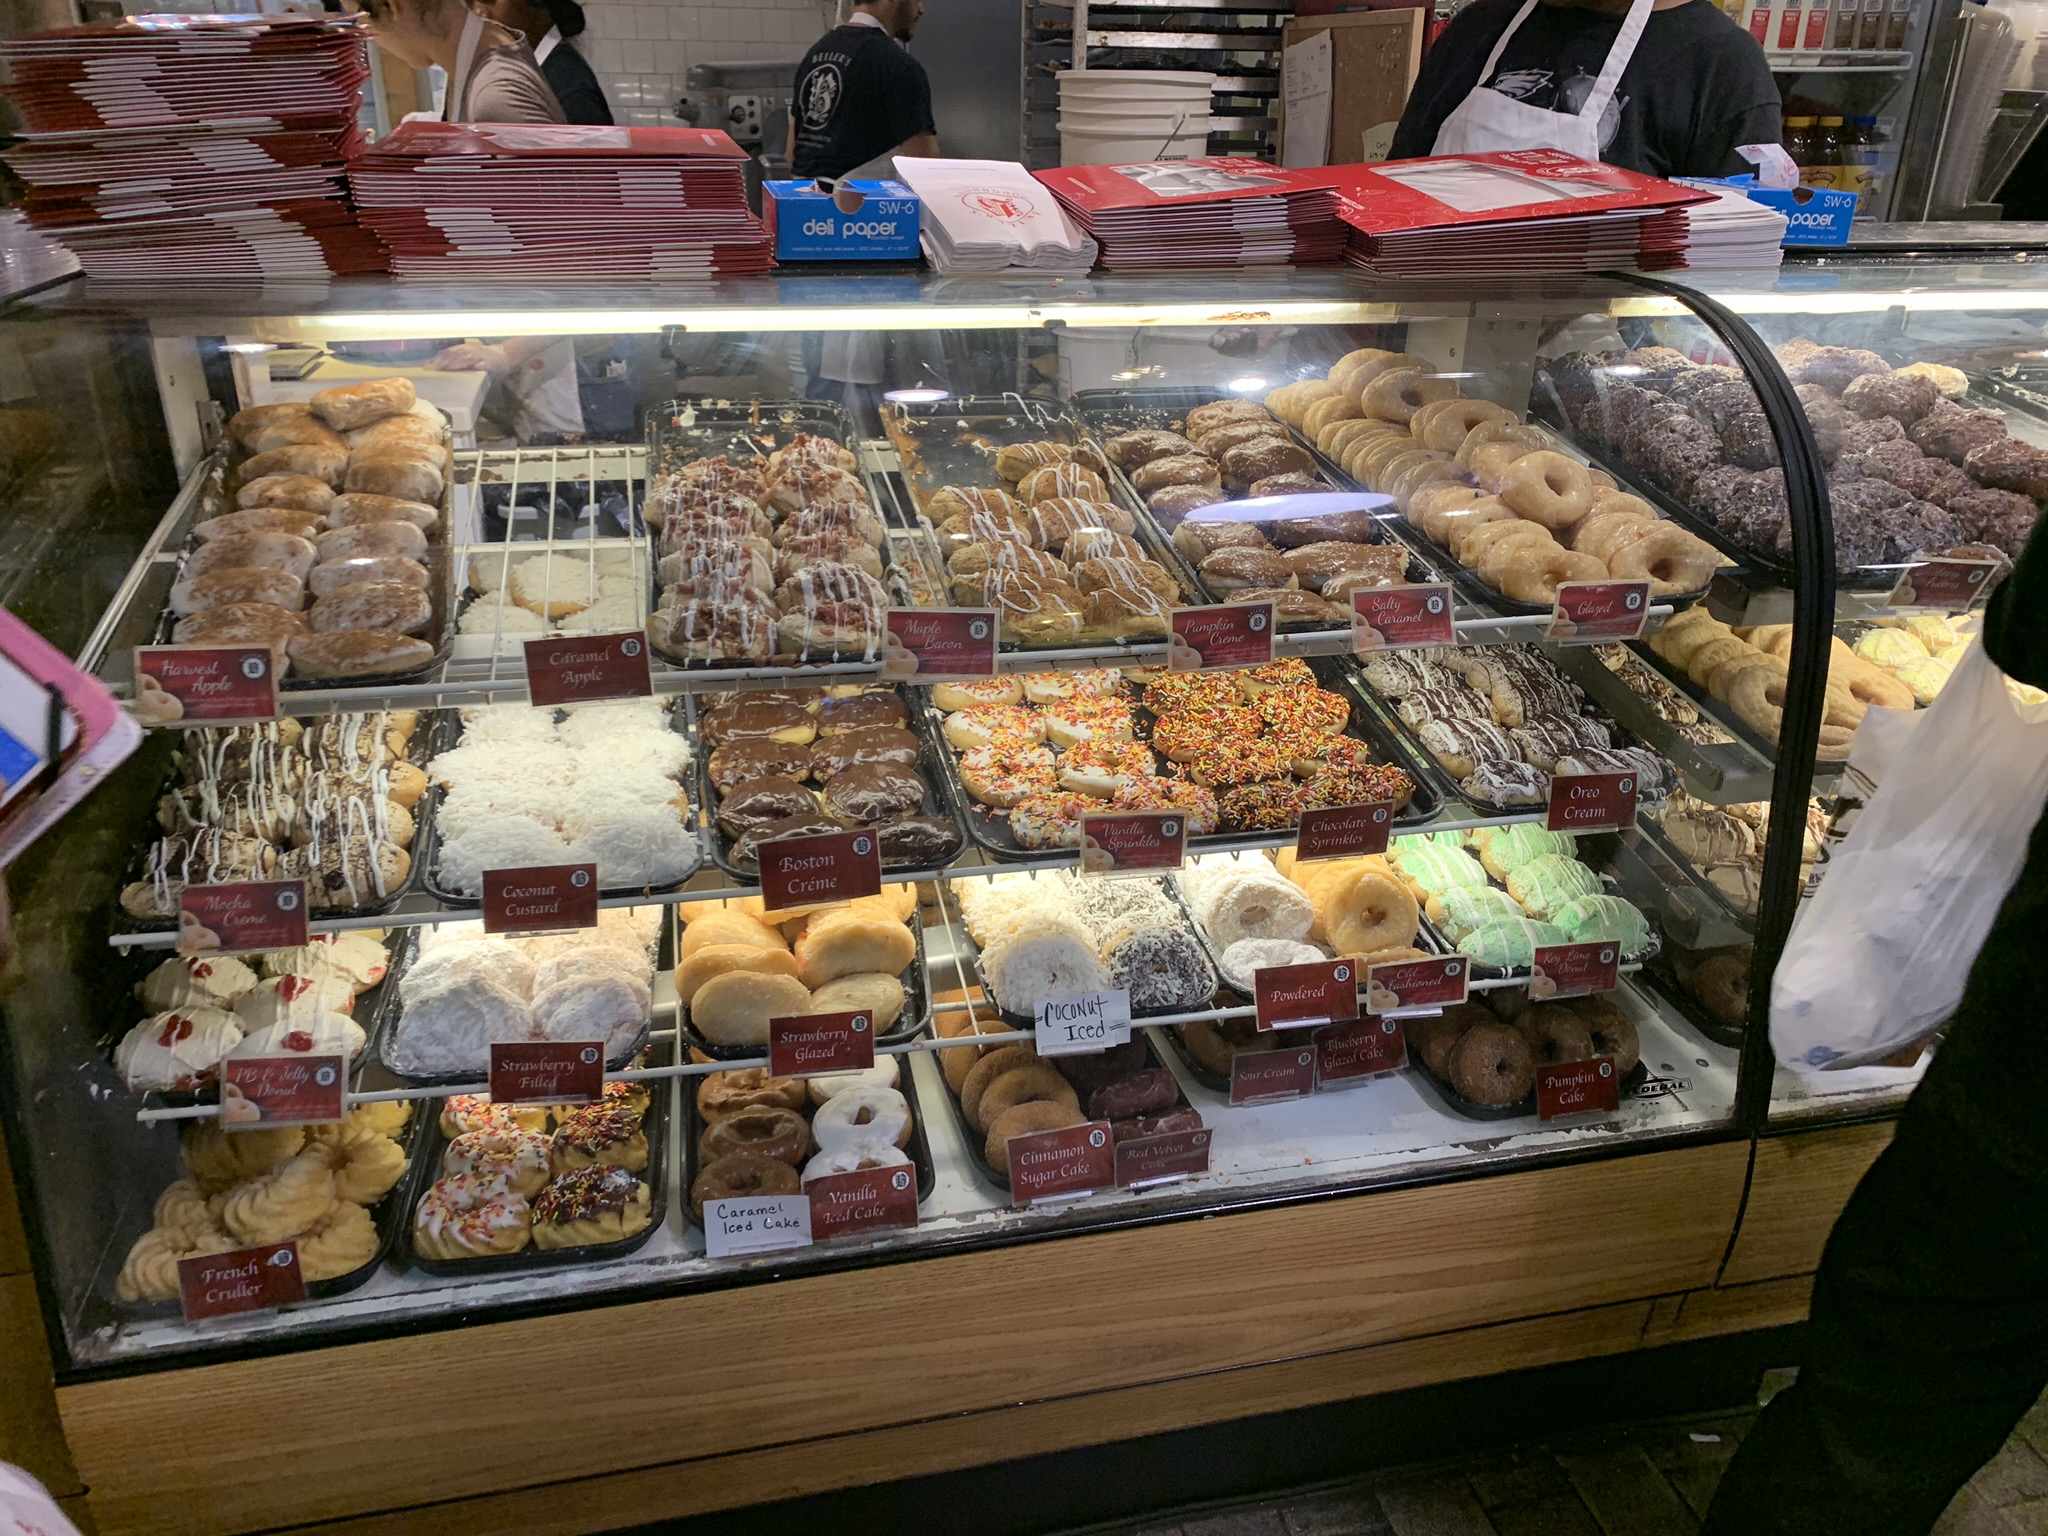 The display case at Beiler’s overflows with tempting donut options